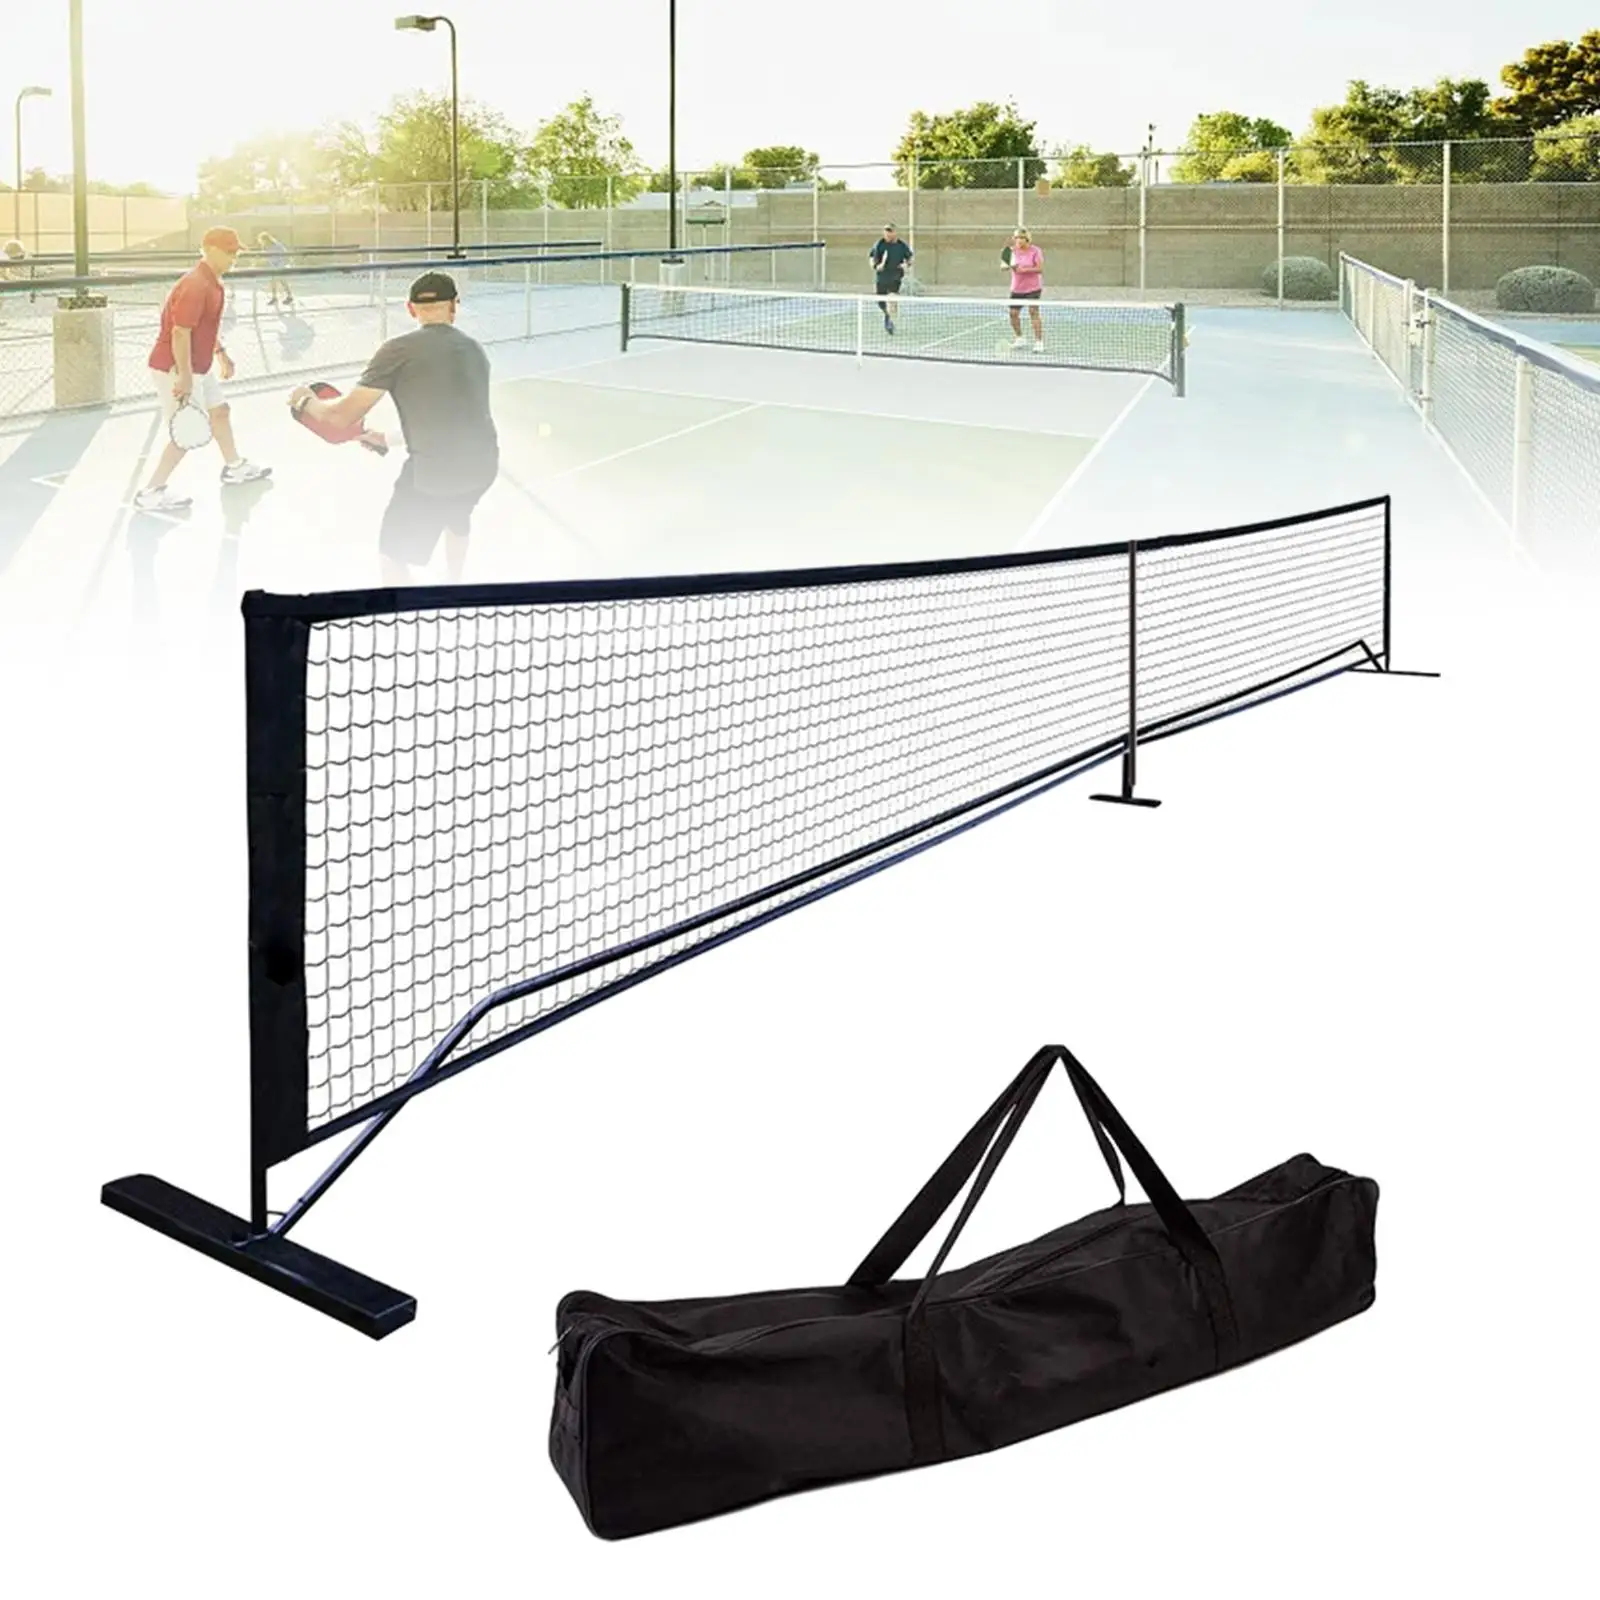 

Portable Pickleball Net System 670cmx91cm Indoor and Outdoor Durable with Bag Lawns Metal Frame Parties Beginners Easy Setup